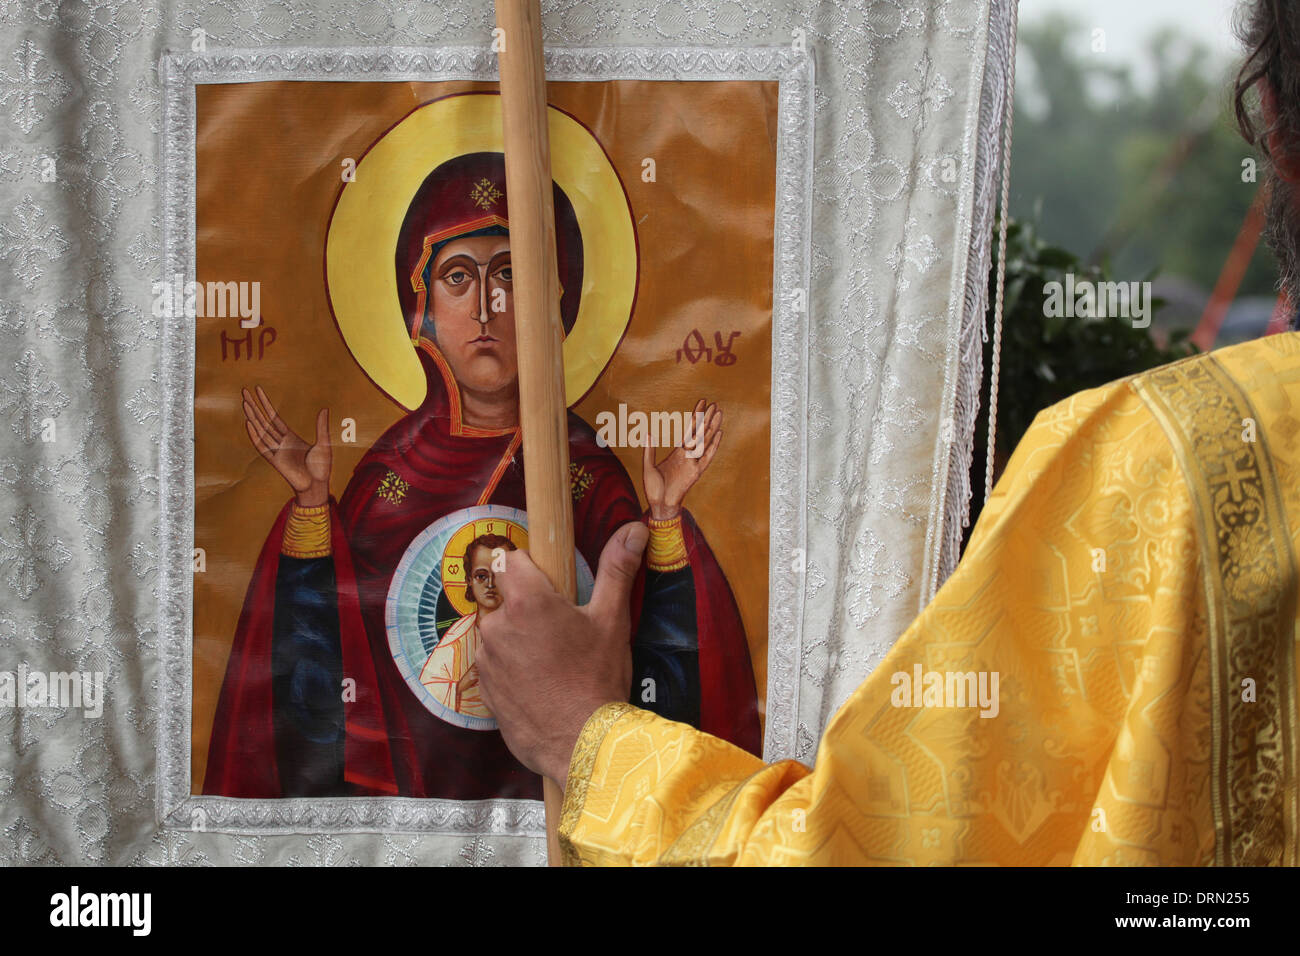 Orthodox priest holds the khorugv decorated with an icon of the Virgin during an orthodox service. Stock Photo